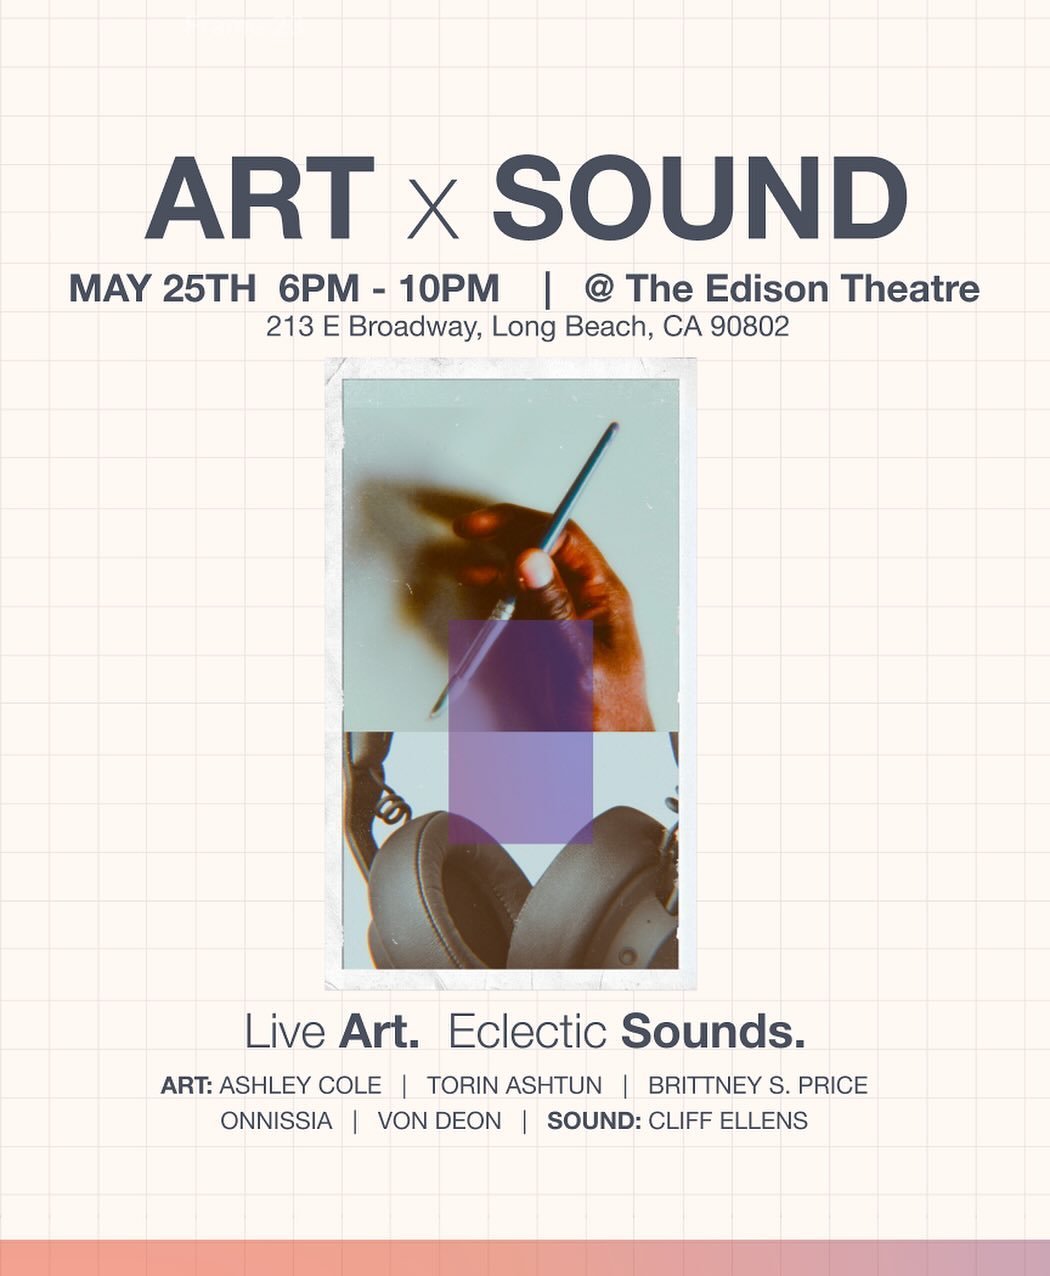 &ldquo;ART x SOUND&rdquo;, a Pop-Up Exhibition at The Edison Theater in Long Beach.

Mark your calendars for May 25th at 6 PM!

Our goal for the evening is to foster an atmosphere where art and sound meet to inspire and engage. Come witness the creat